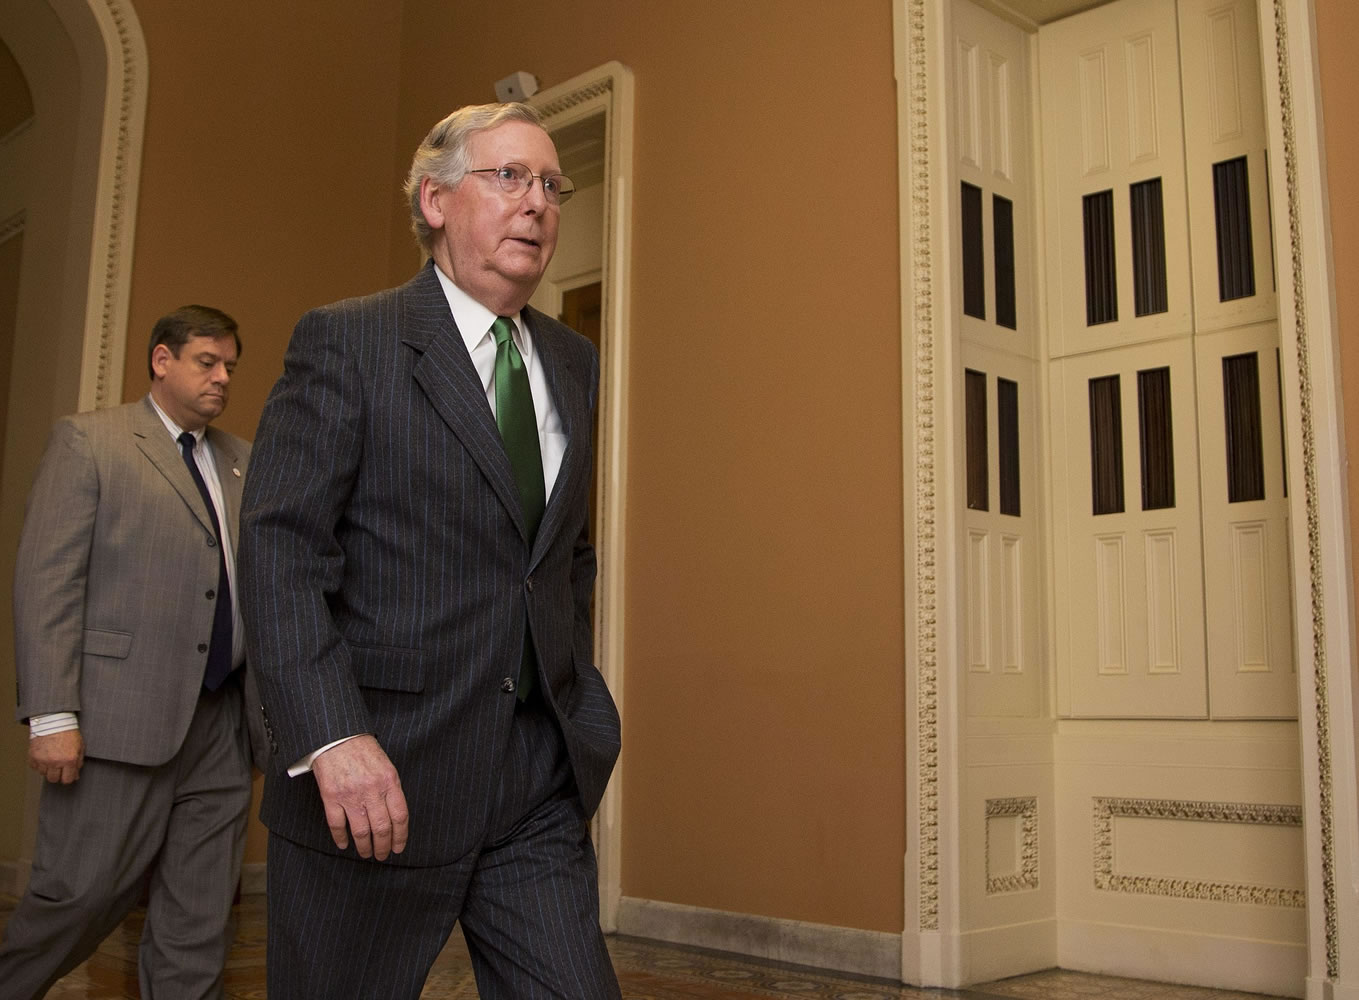 Senate Majority Leader Mitch McConnell, R-Ky., right, leaves the Senate floor on Capitol Hill in Washington, Monday, Feb. 23, 2015, following a cloture vote.